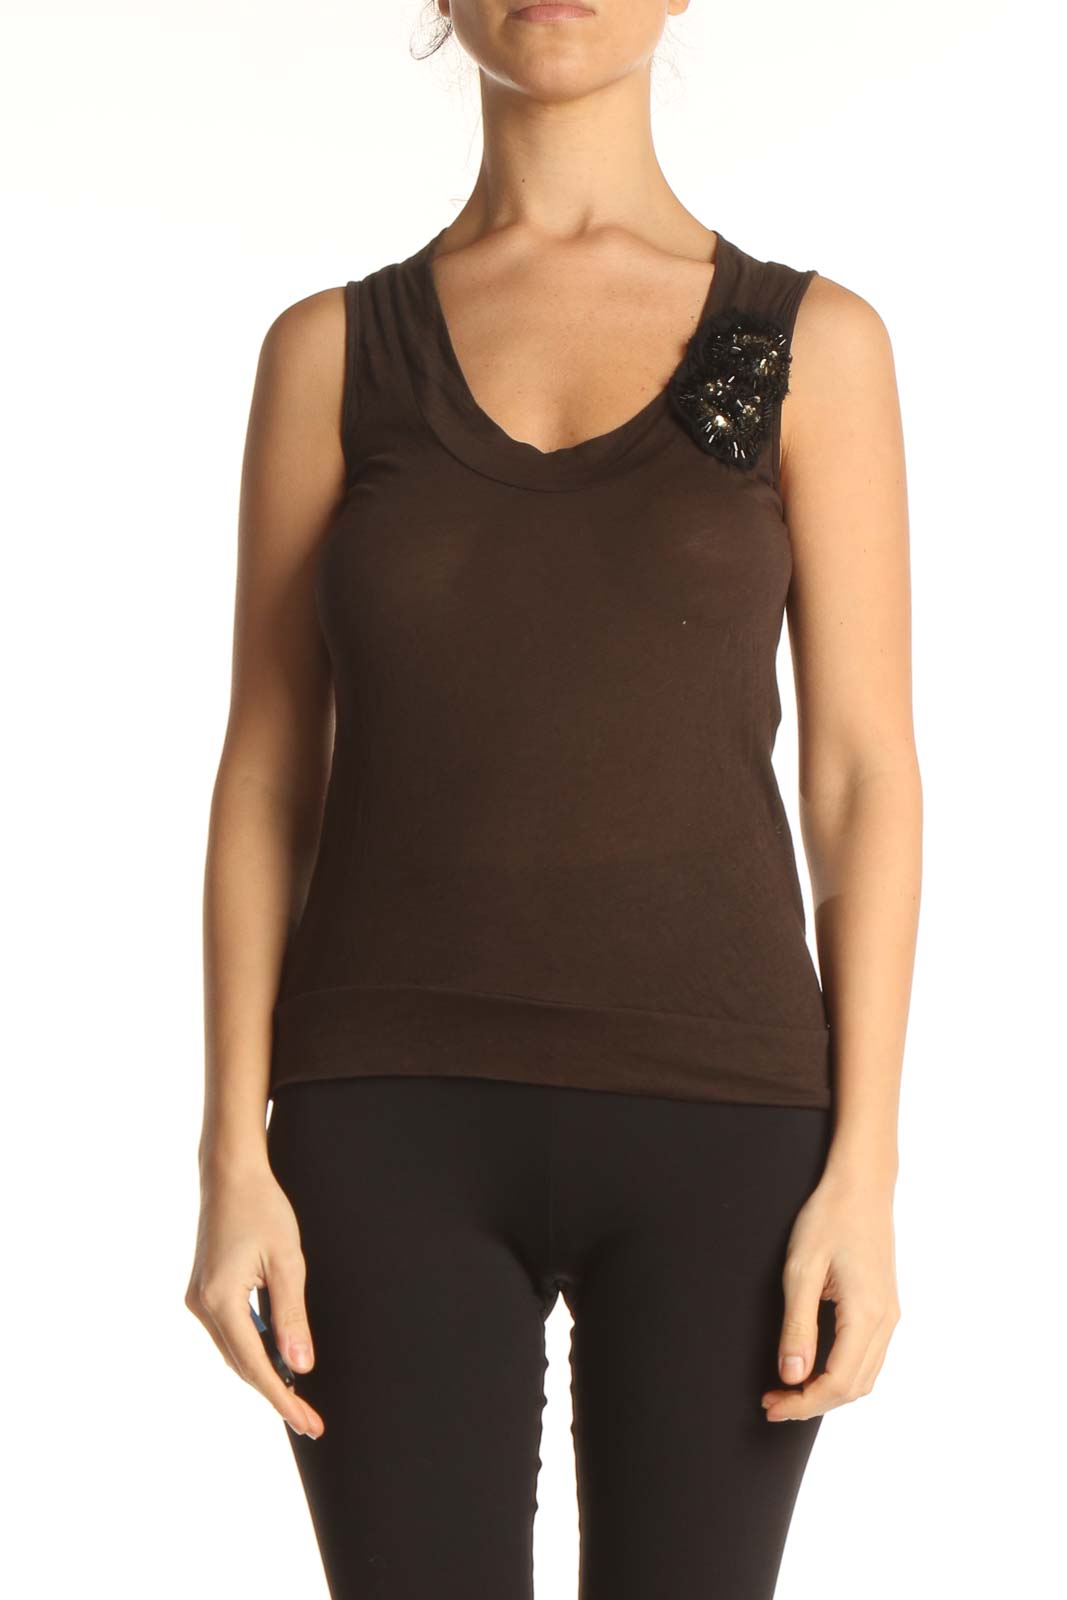 Brown Solid Casual Tank Top With Beaded Floral Detail On Strap Front